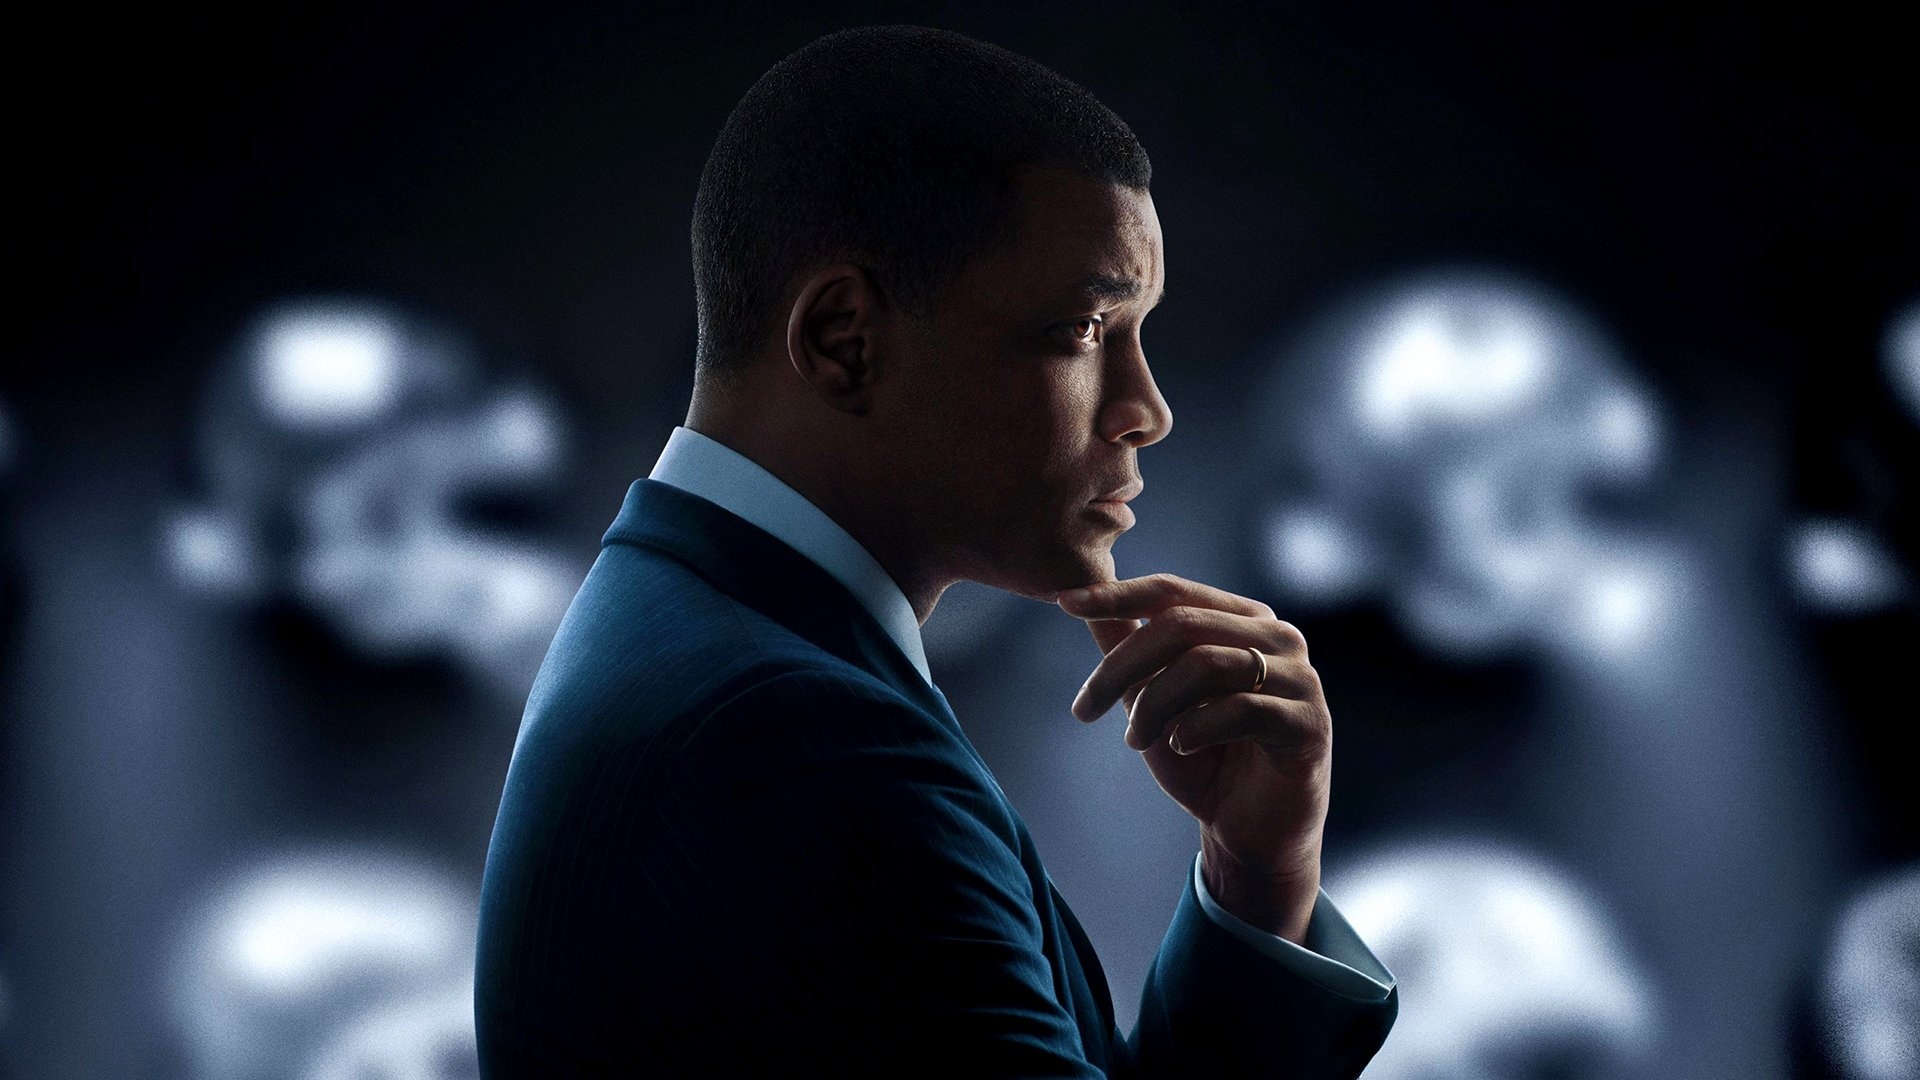 Concussion, Movie, HD wallpapers, Backgrounds, 1920x1080 Full HD Desktop